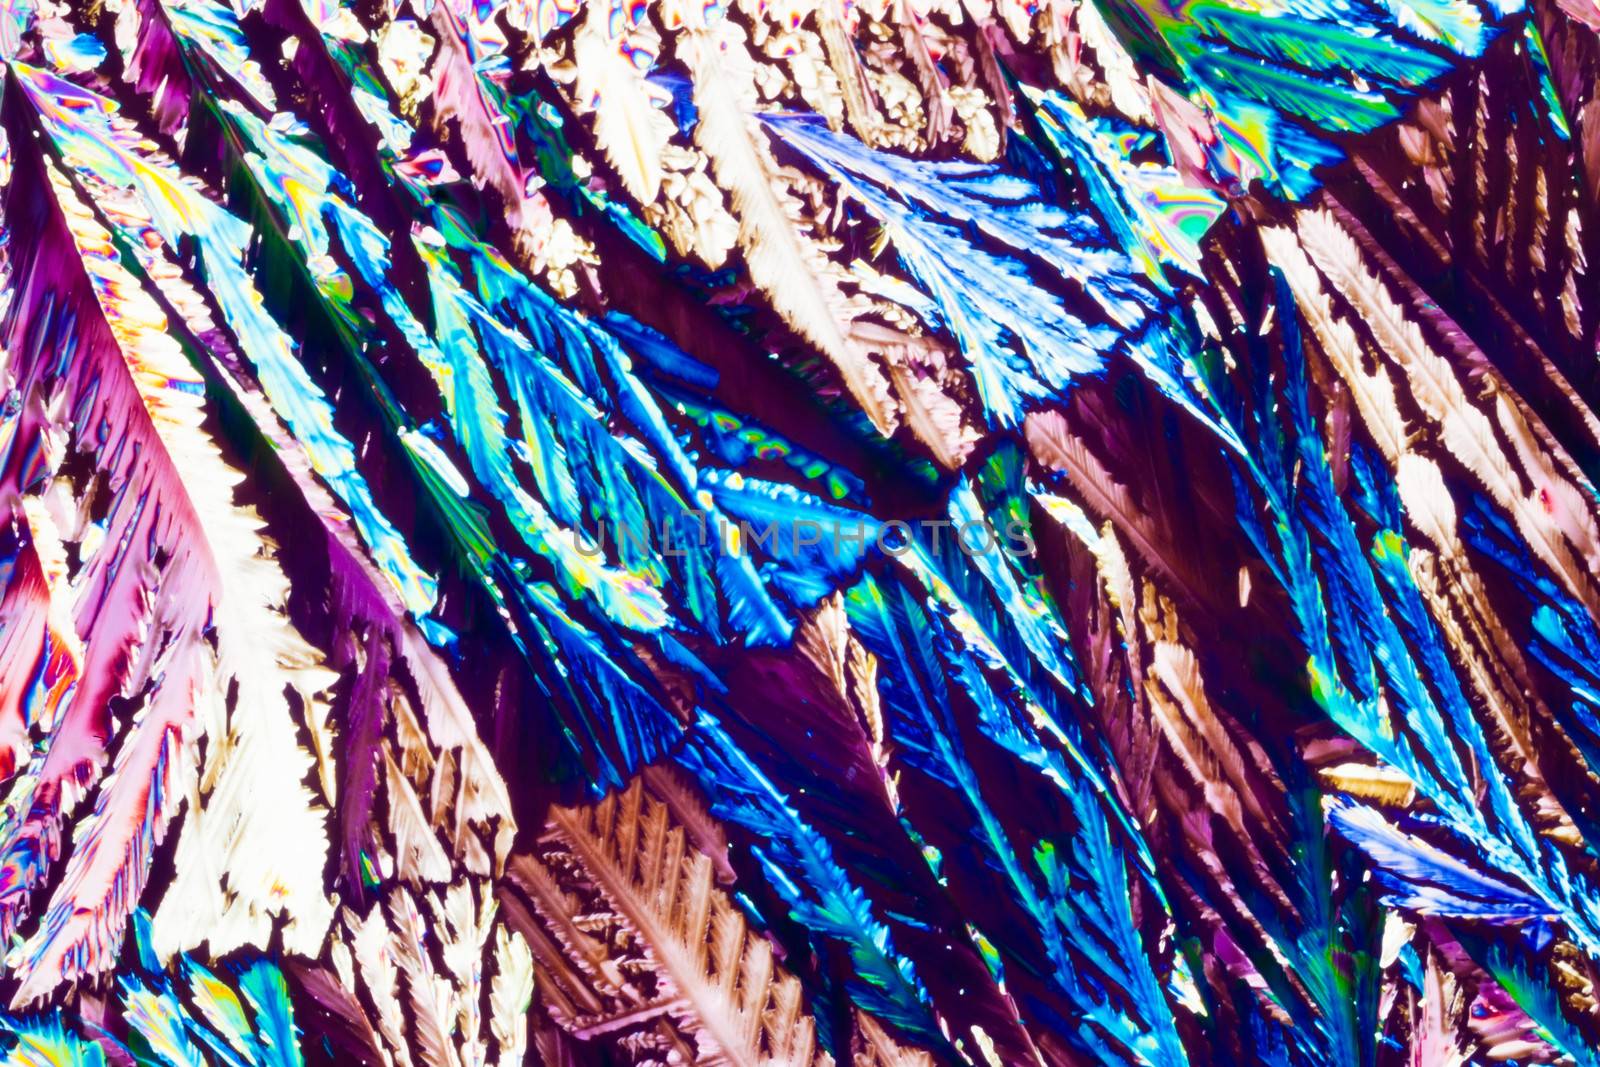 Hydroquinone crystals in polarized light by PiLens